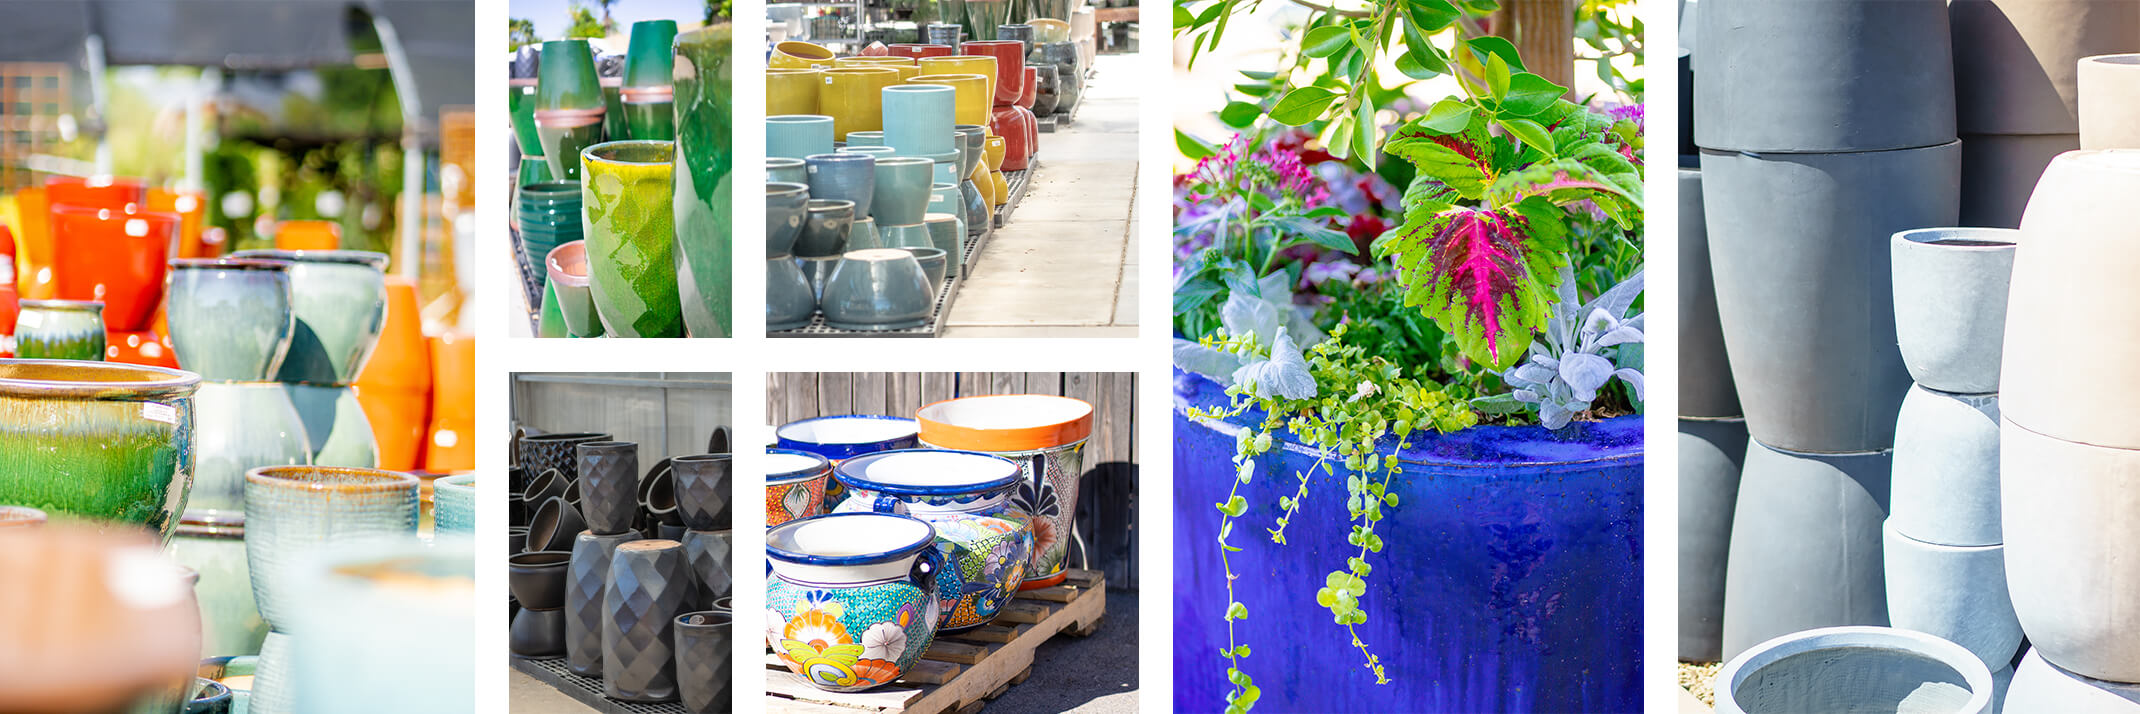 A wide variety of colors, shapes and sizes of outdoor pottery.